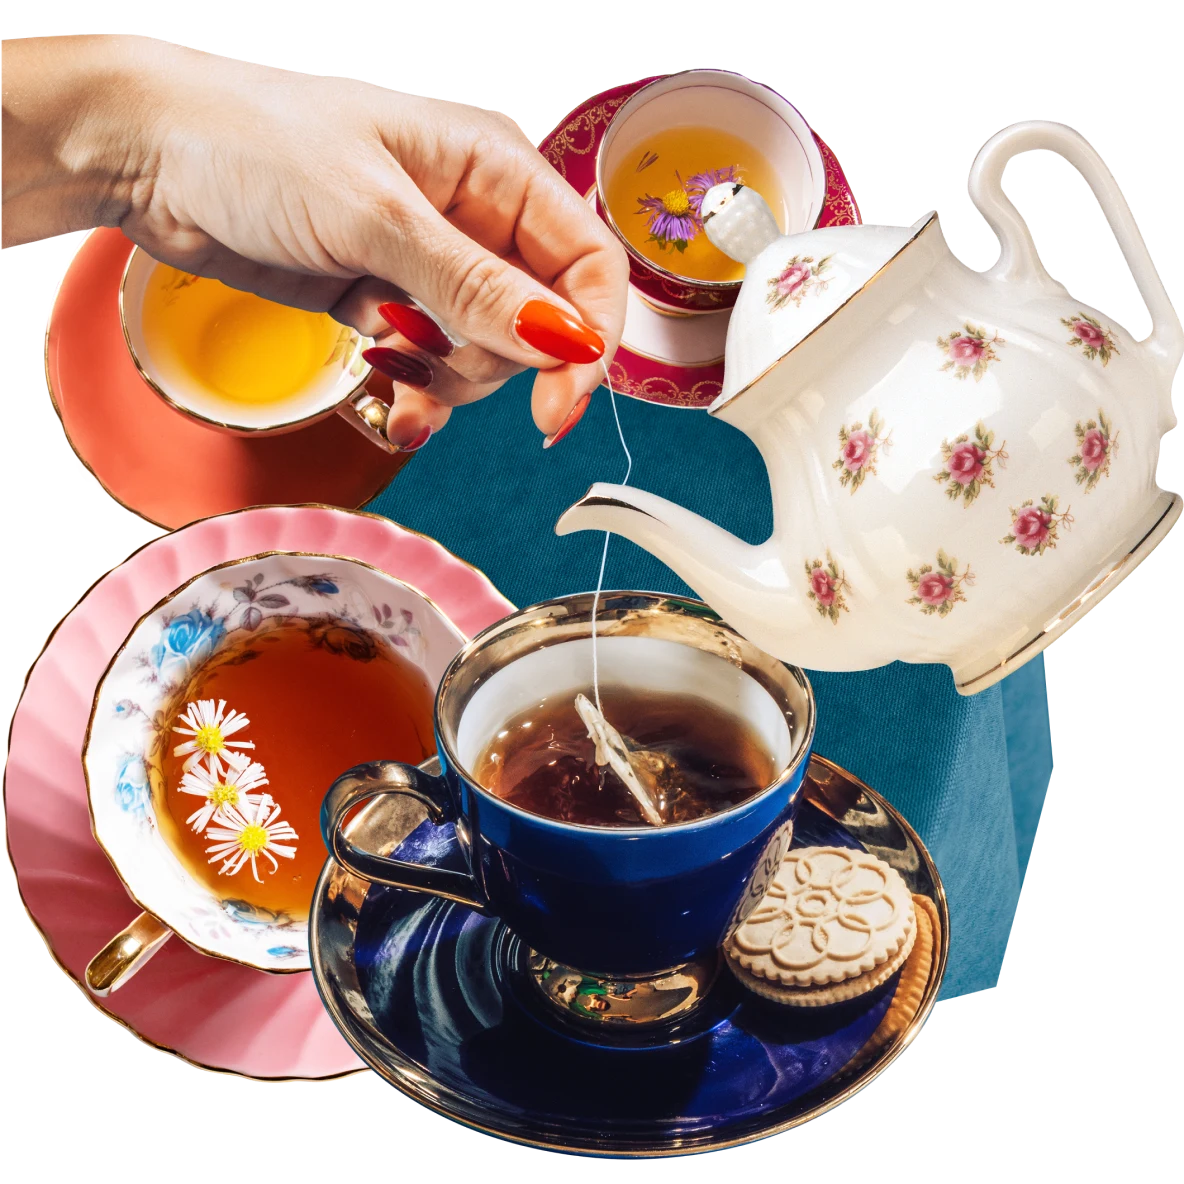 Collage of teacups filled with tea in dark and amber shades. White teapot with pink roses tilts downward. A white hand dips a tea bag into a dark blue cup filled with tea.